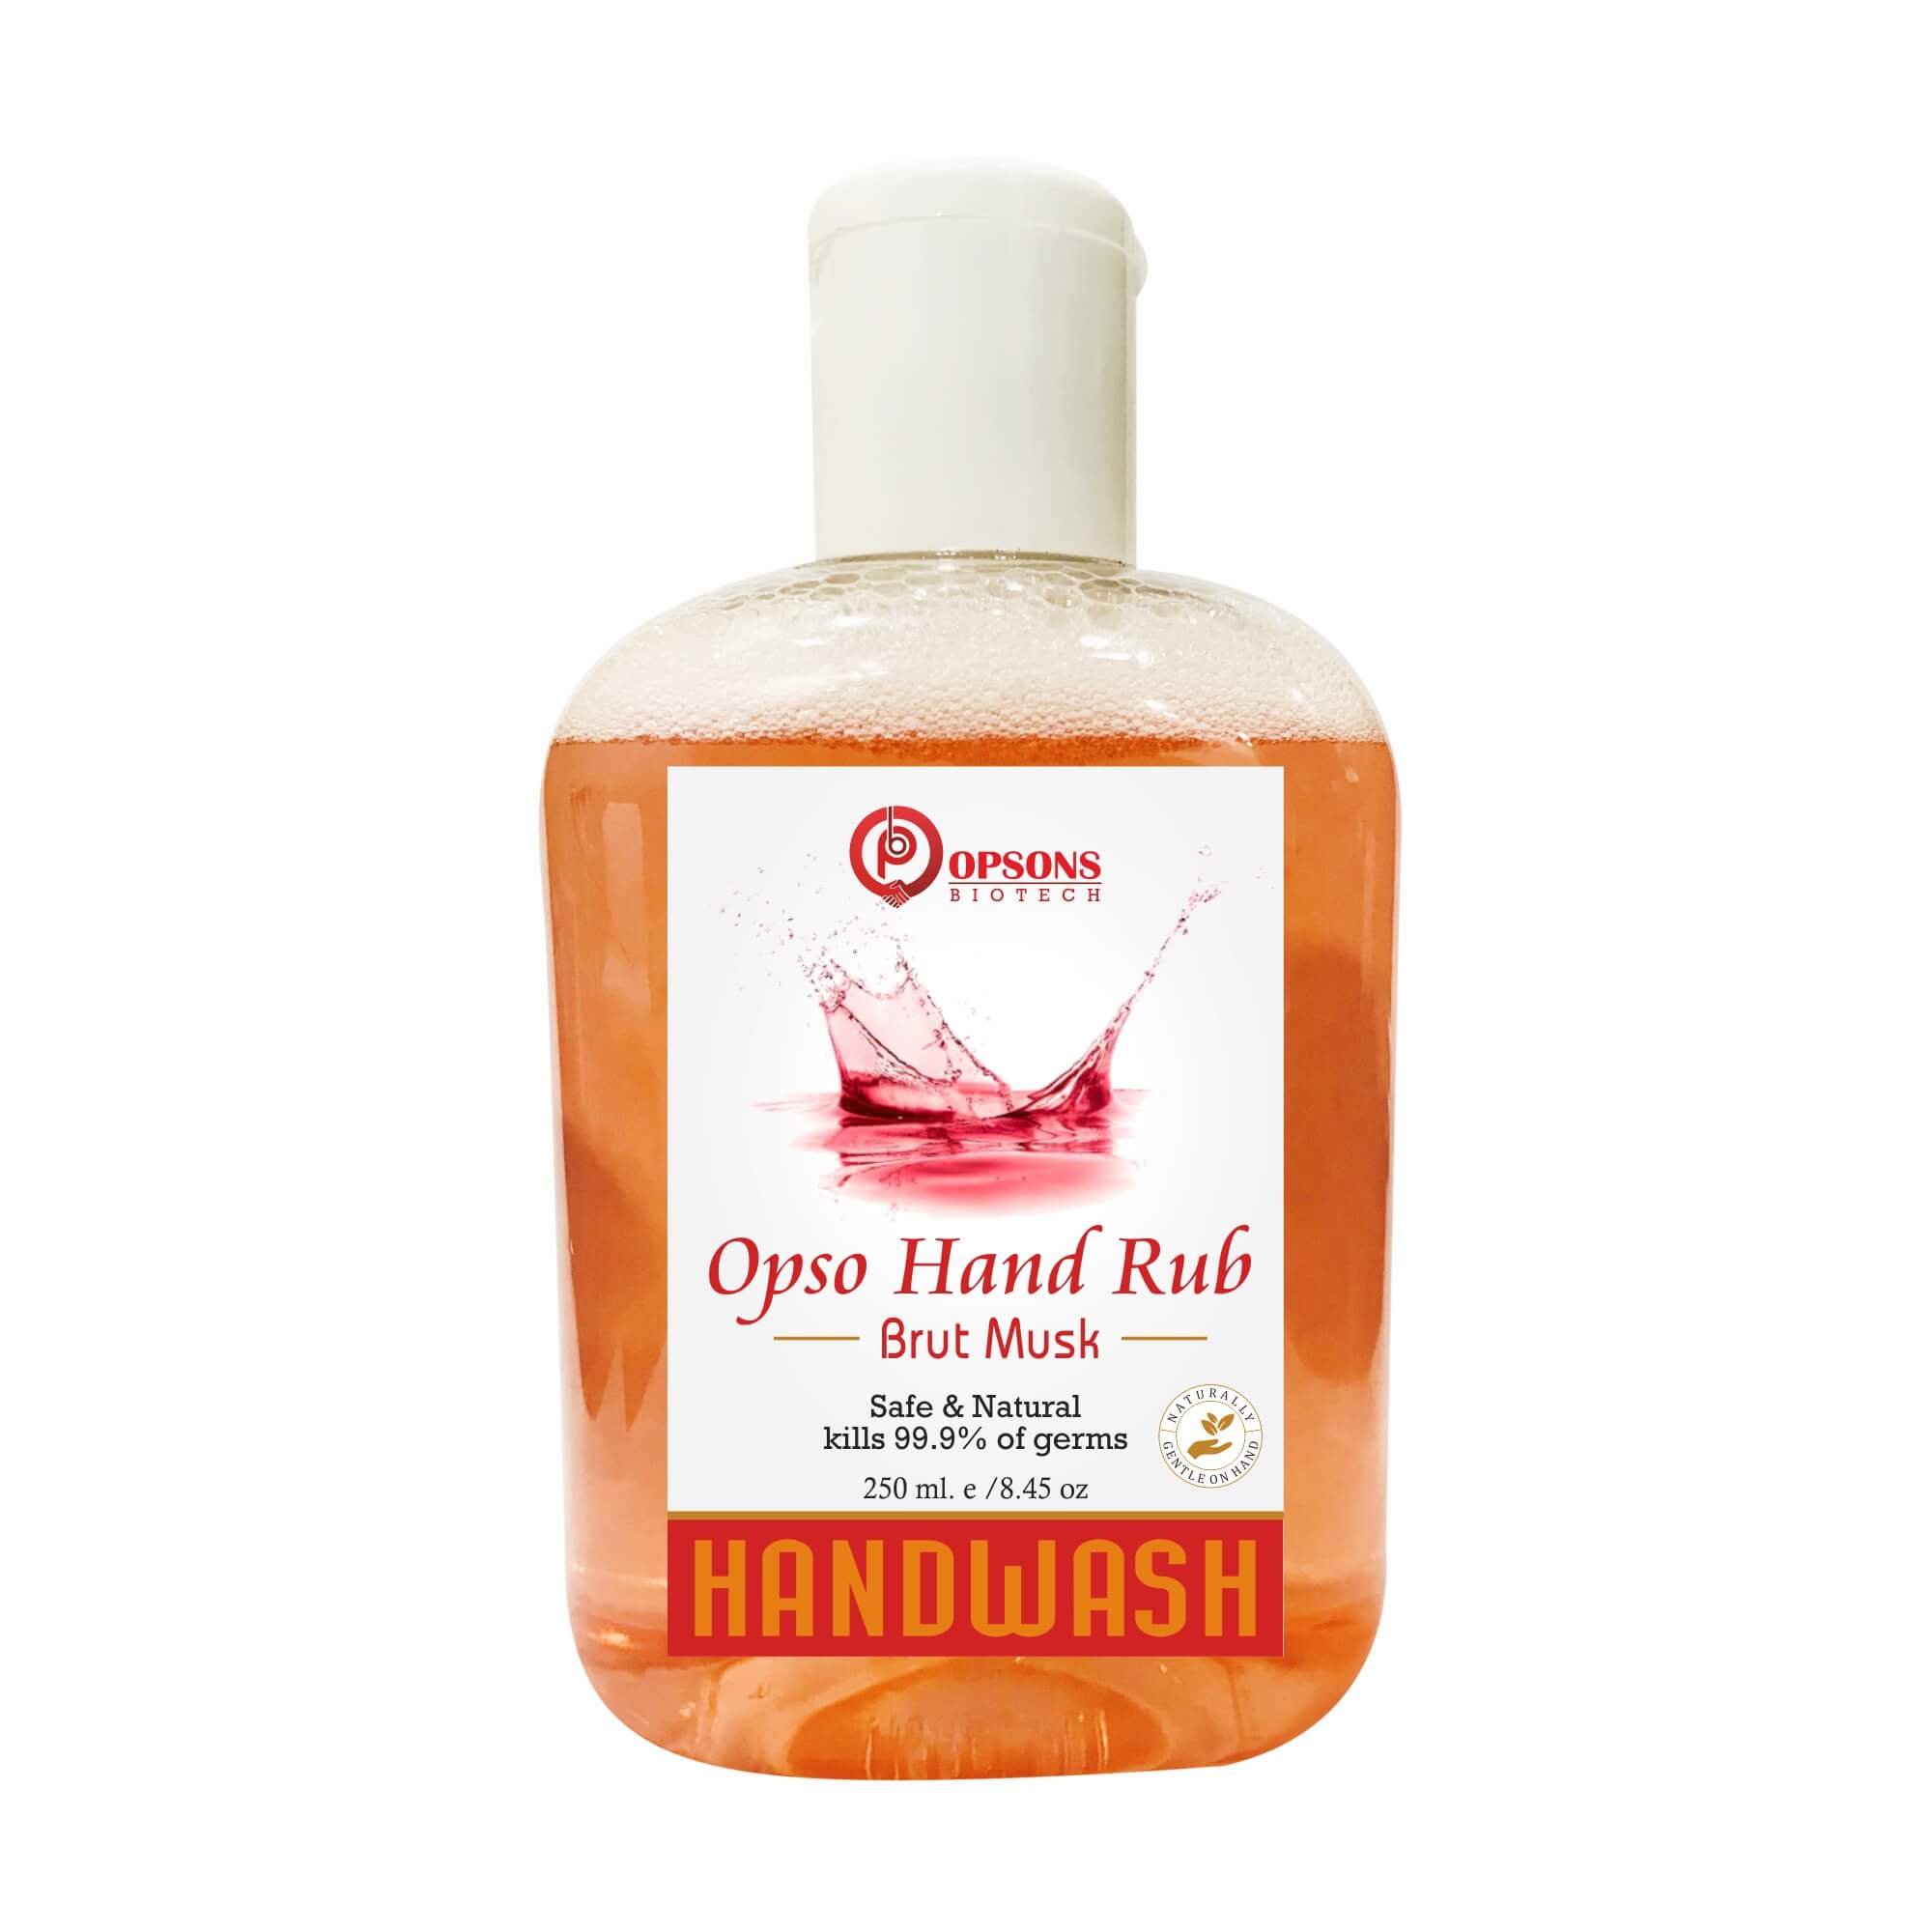 Product Name: Opso Hand Rub Mask, Compositions of Opso Hand Rub are Opso Hand Rub - Opsons Biotech